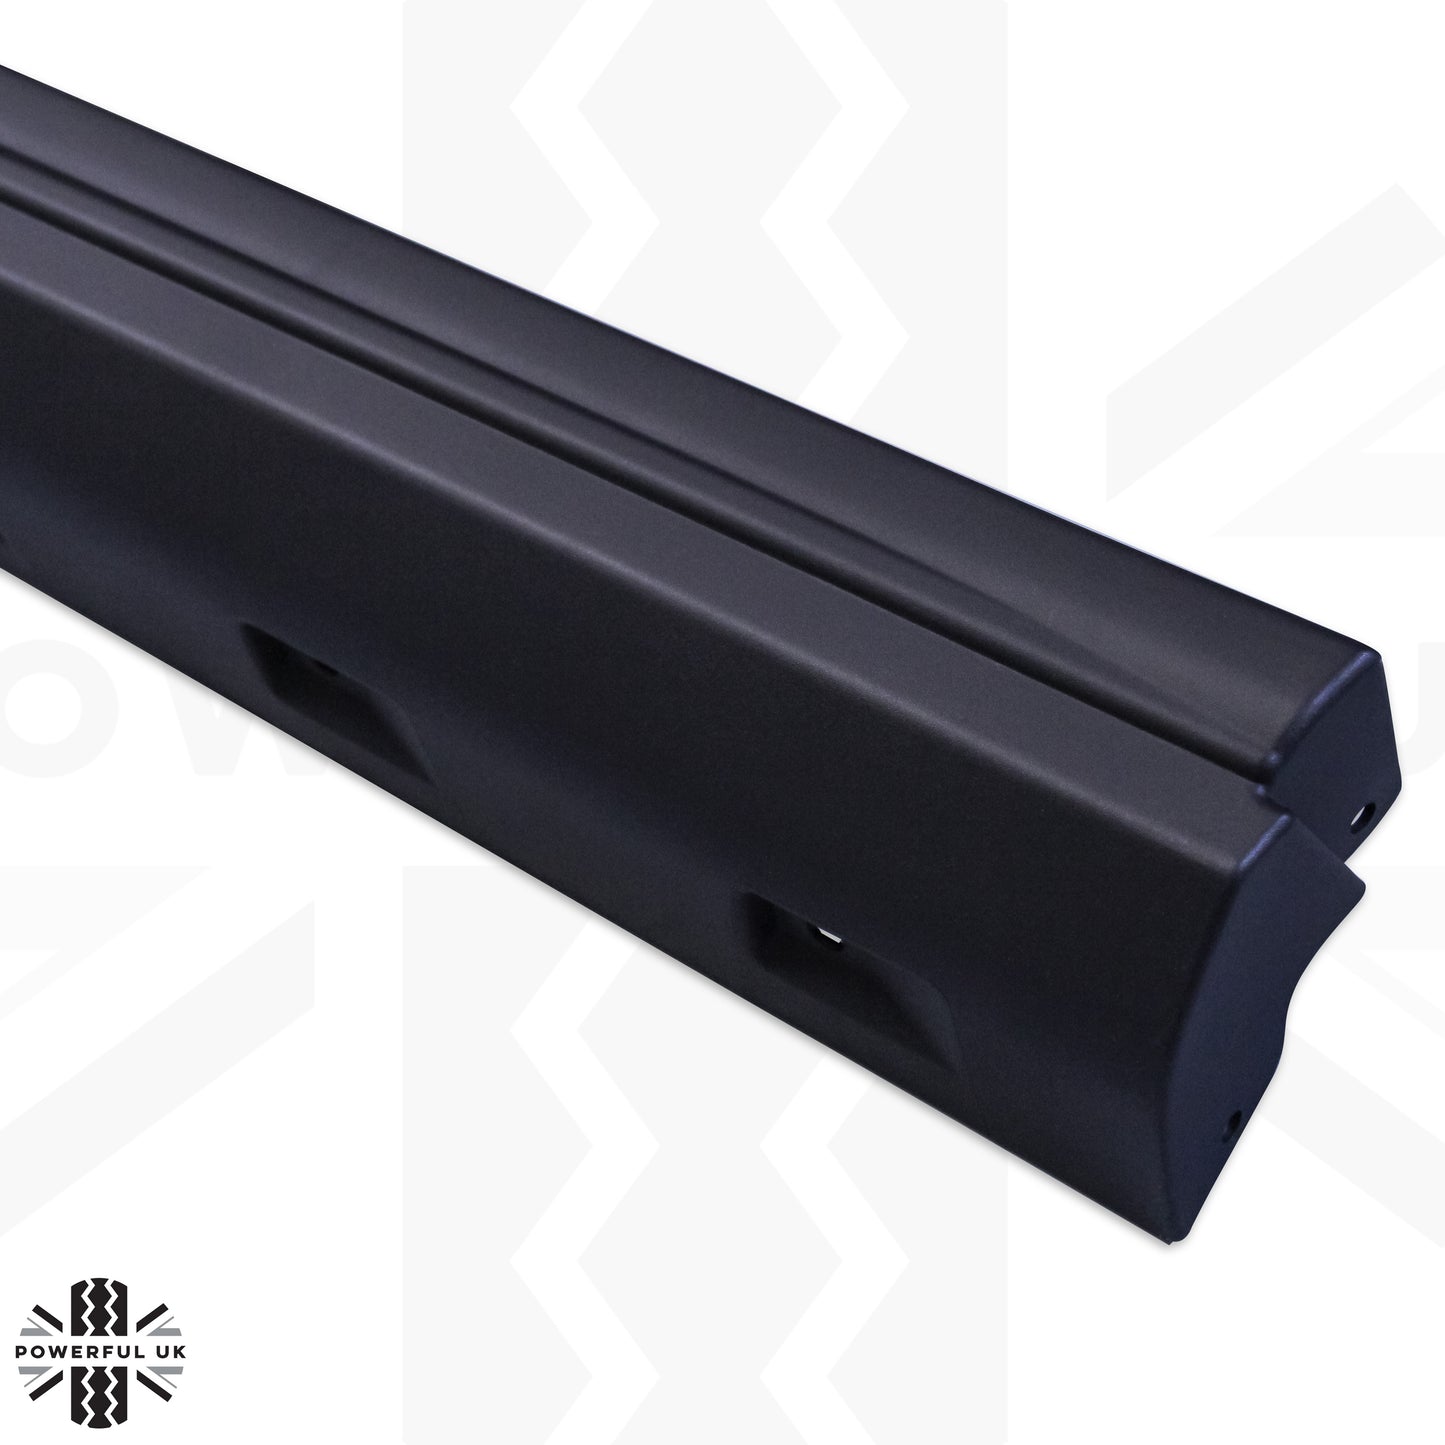 Sill Cover Plastic Moulding for Land Rover Discovery 3 & 4 - LH